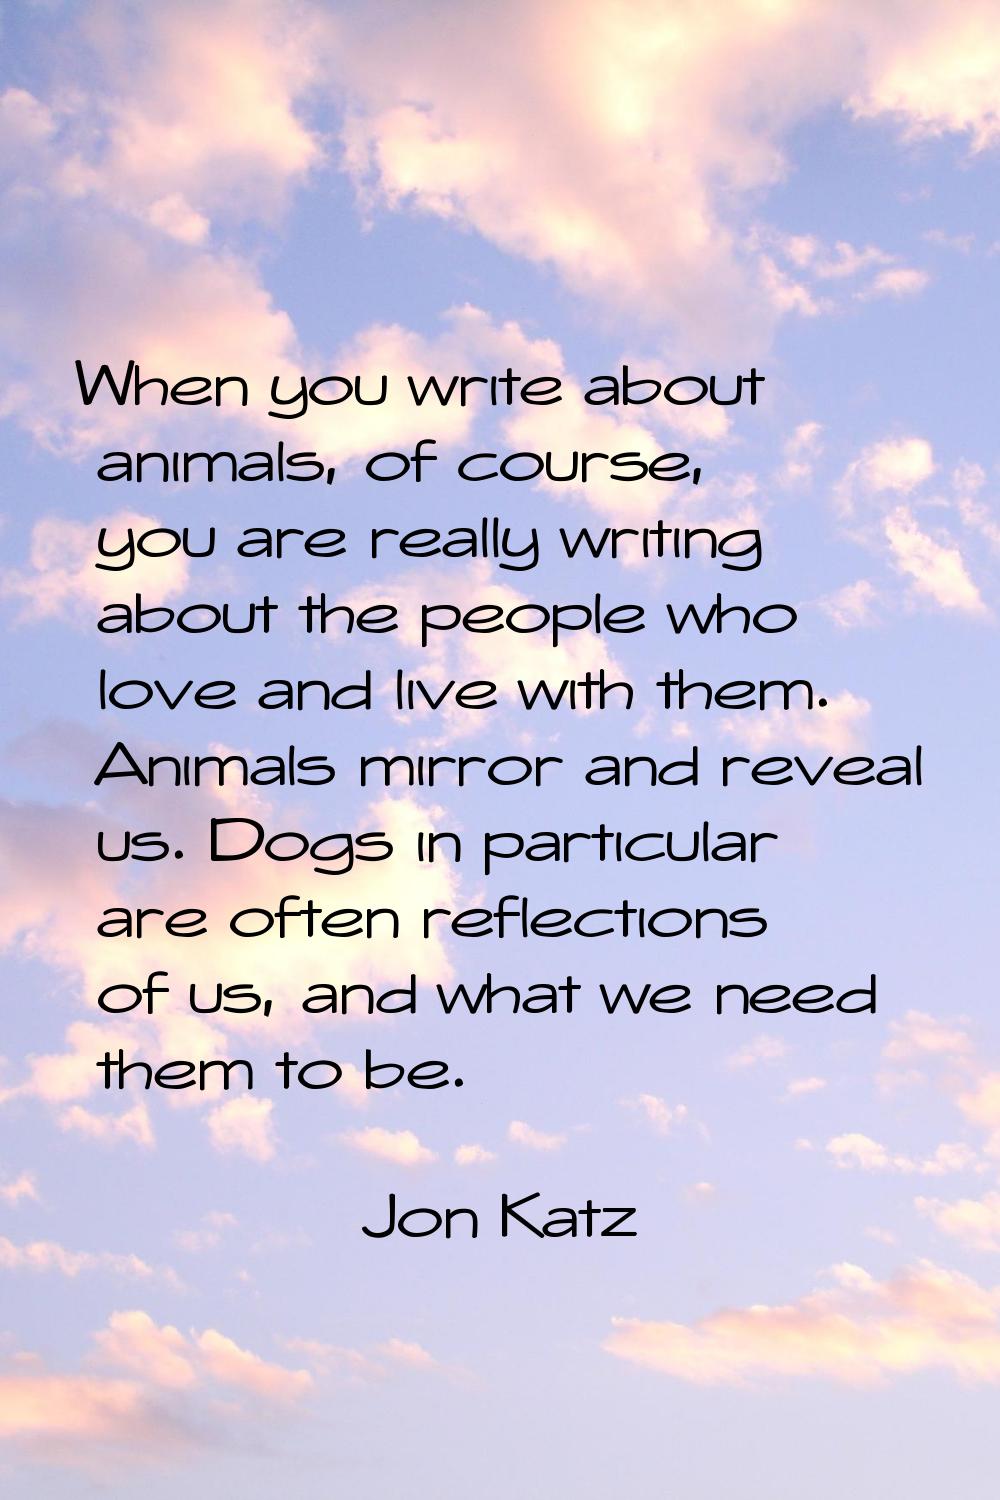 When you write about animals, of course, you are really writing about the people who love and live 